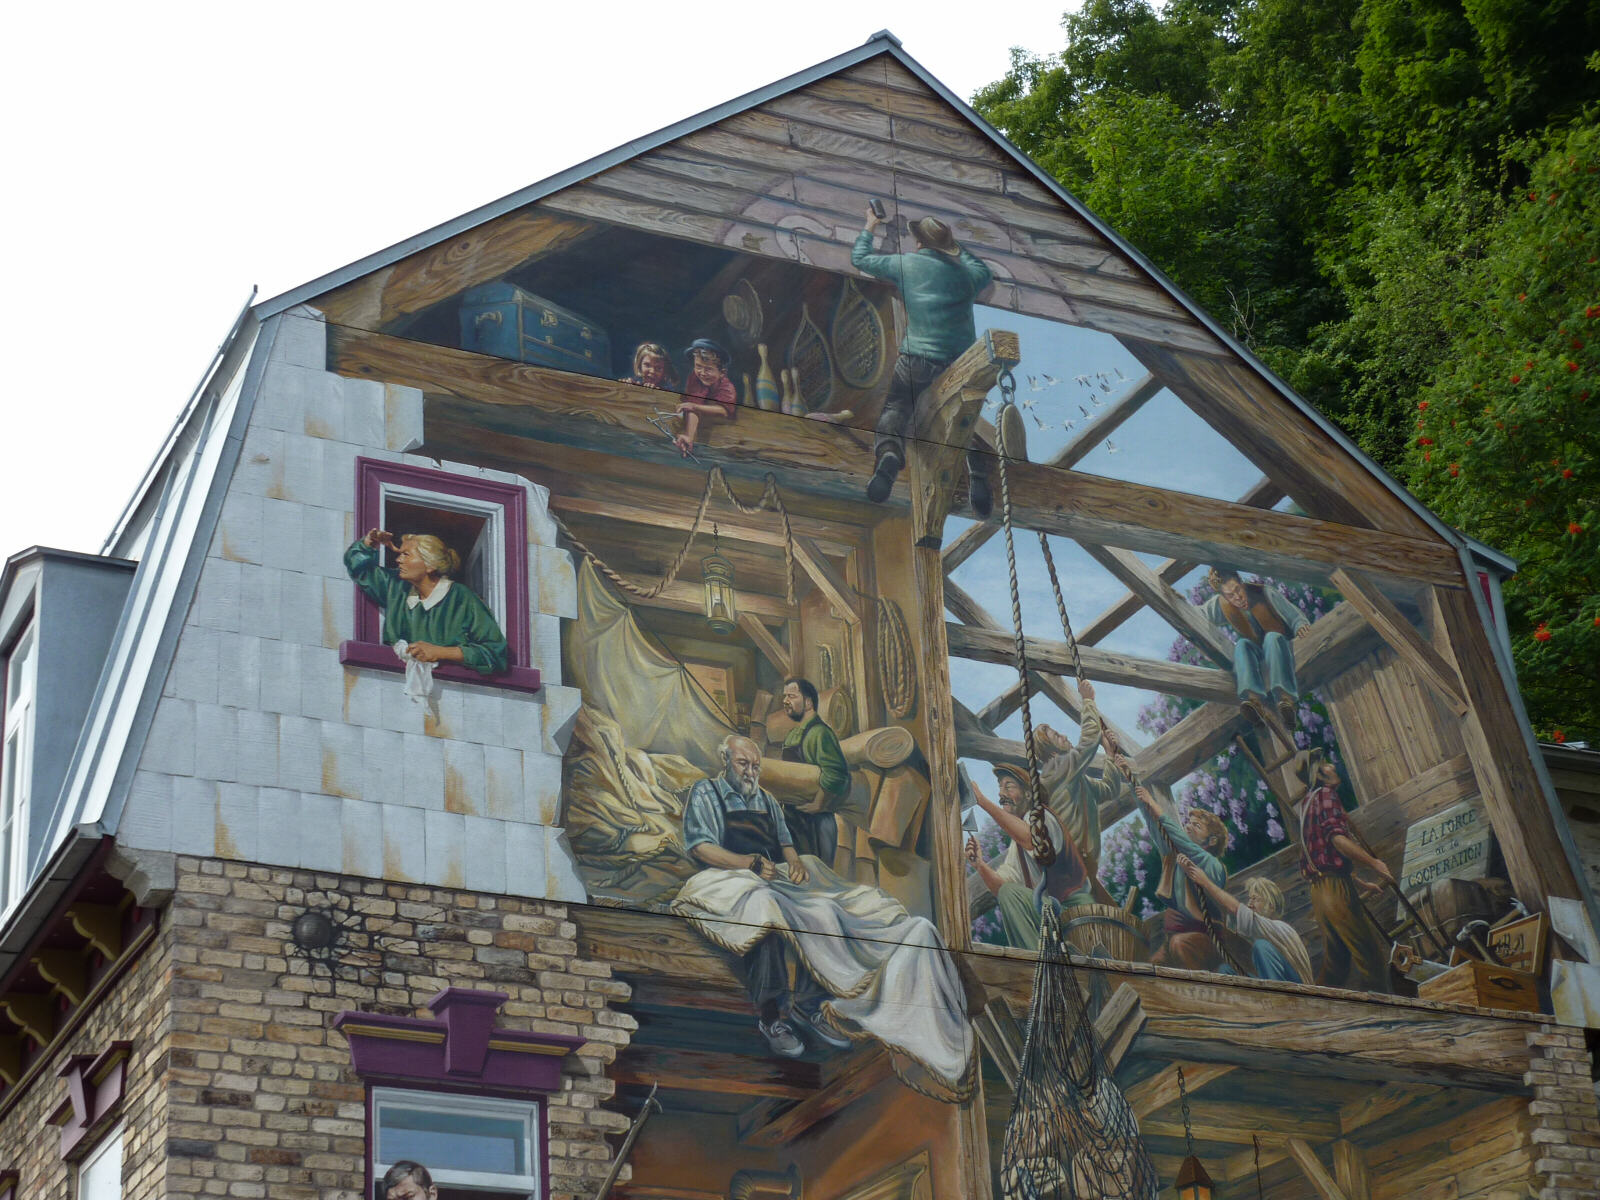 Elaborate mural on a house in Quebec, Canada